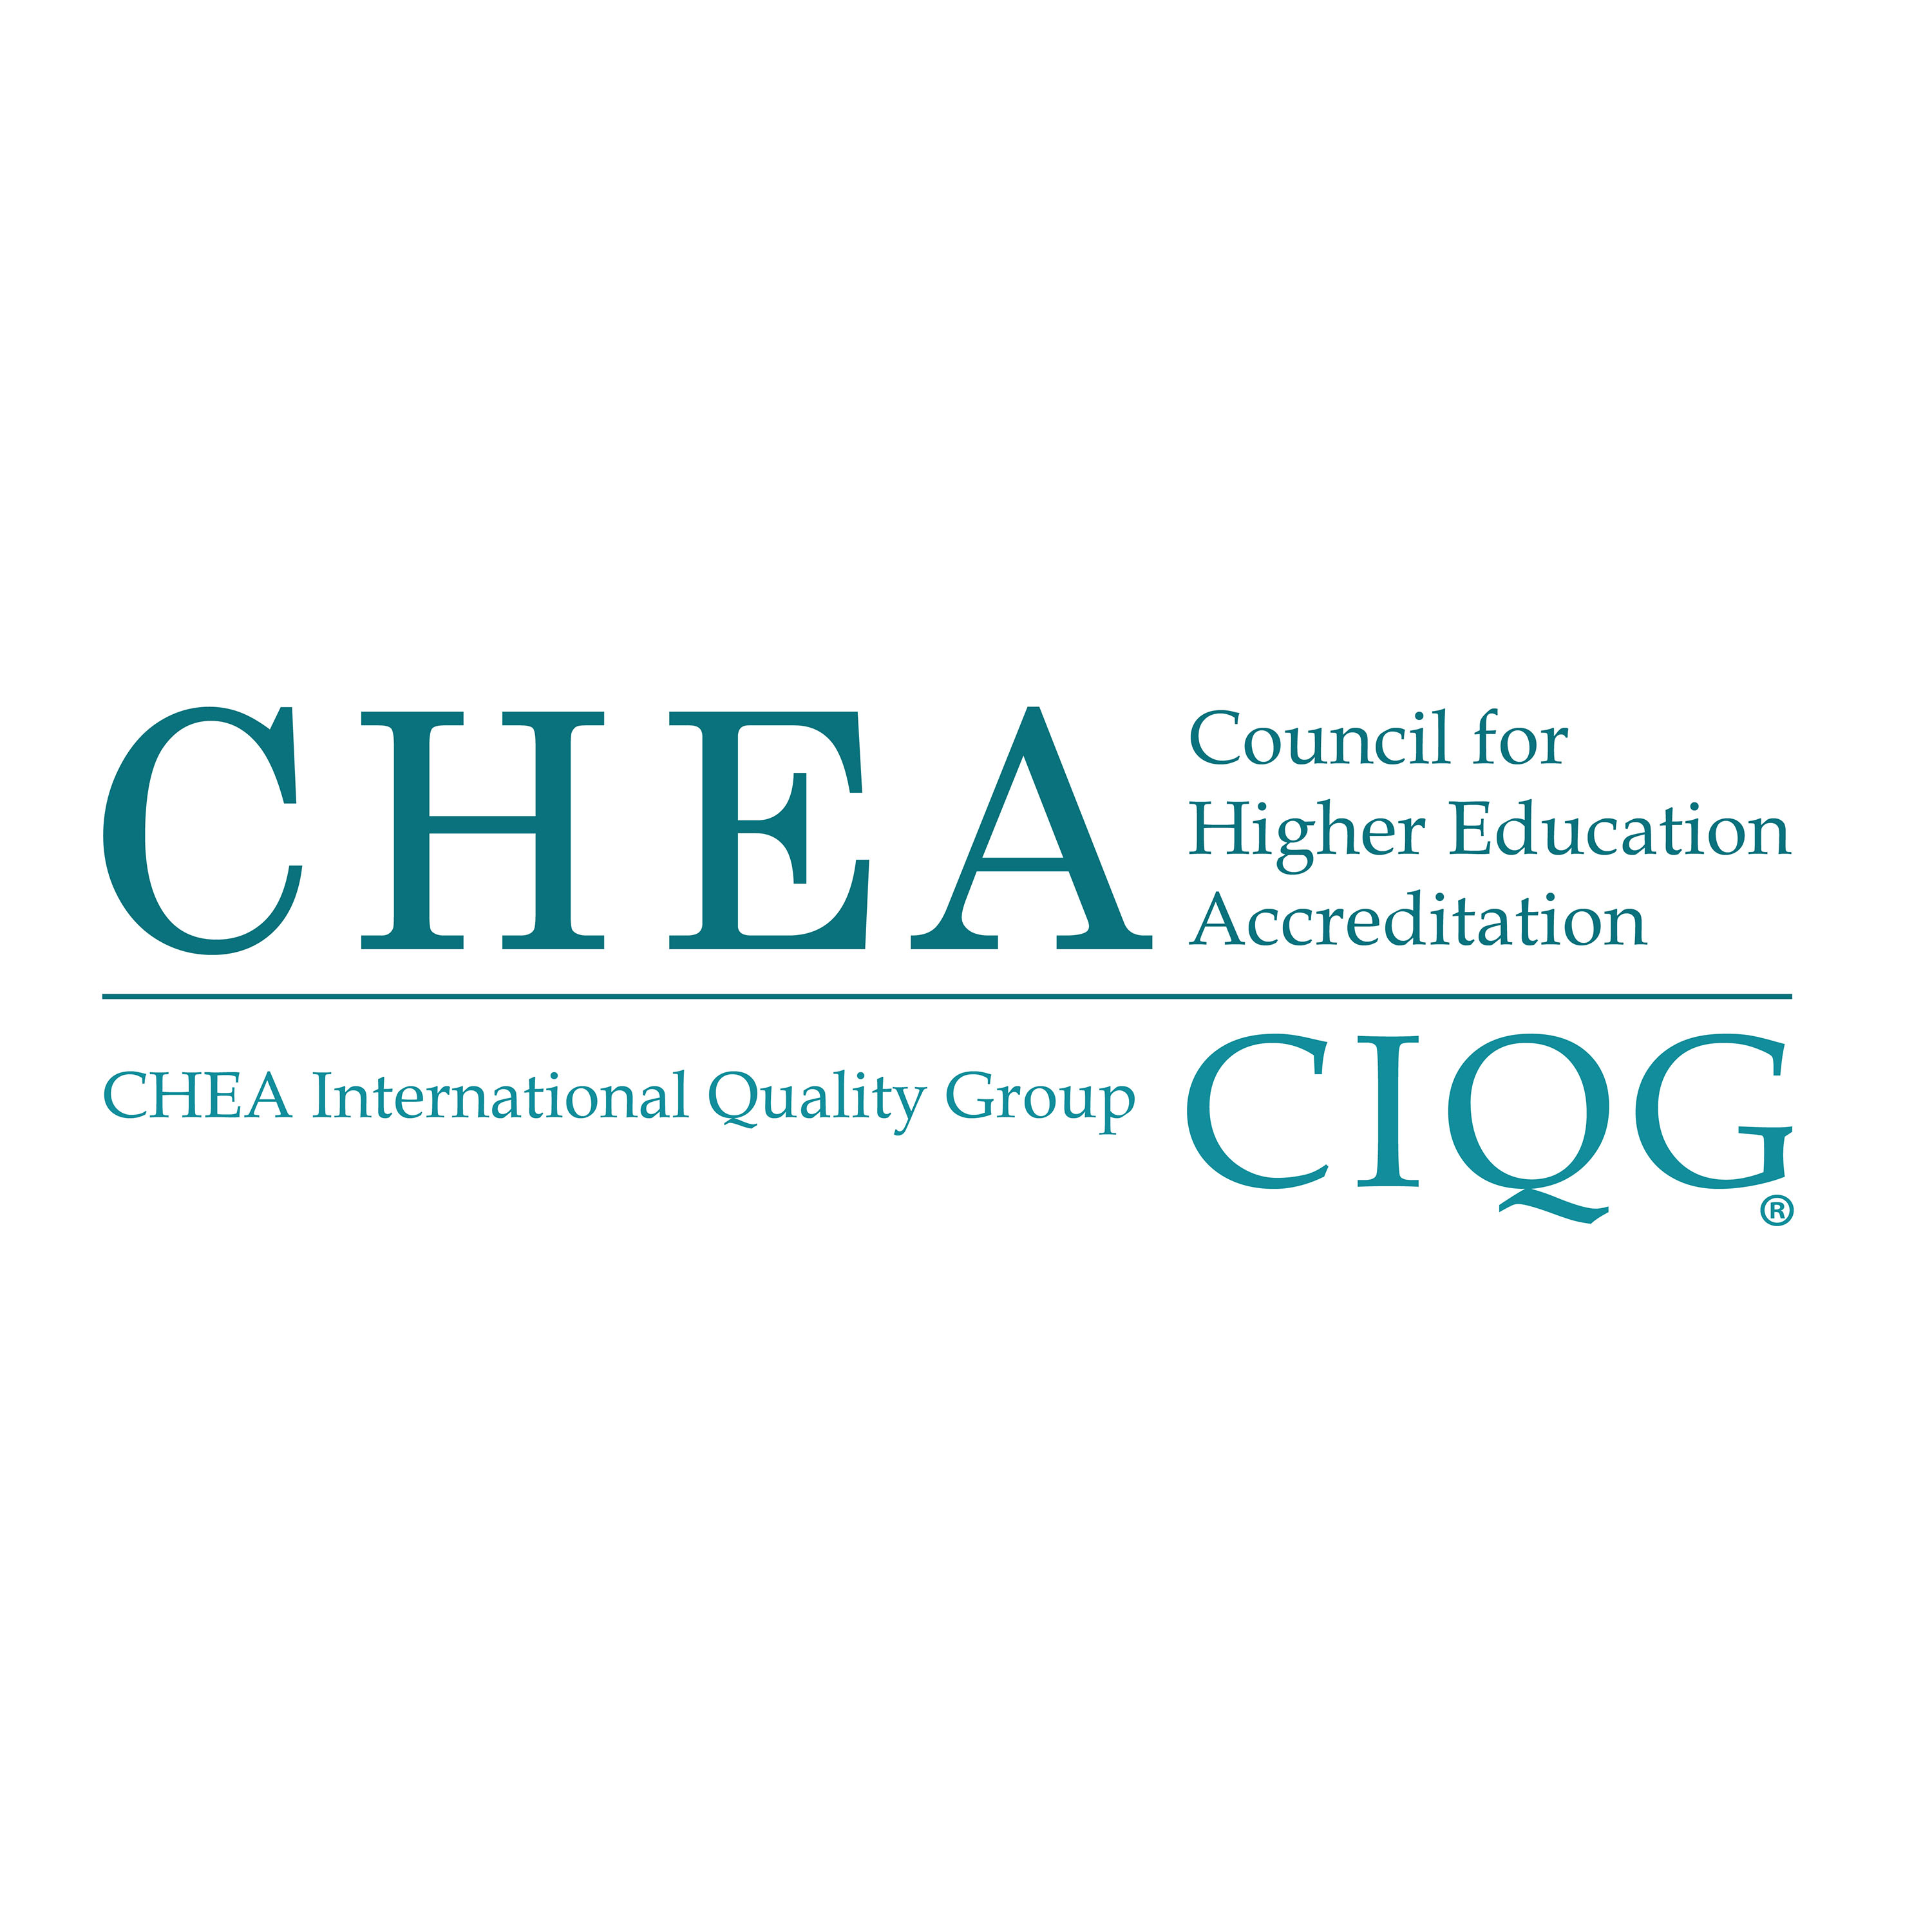 Council for Higher Education Accreditation